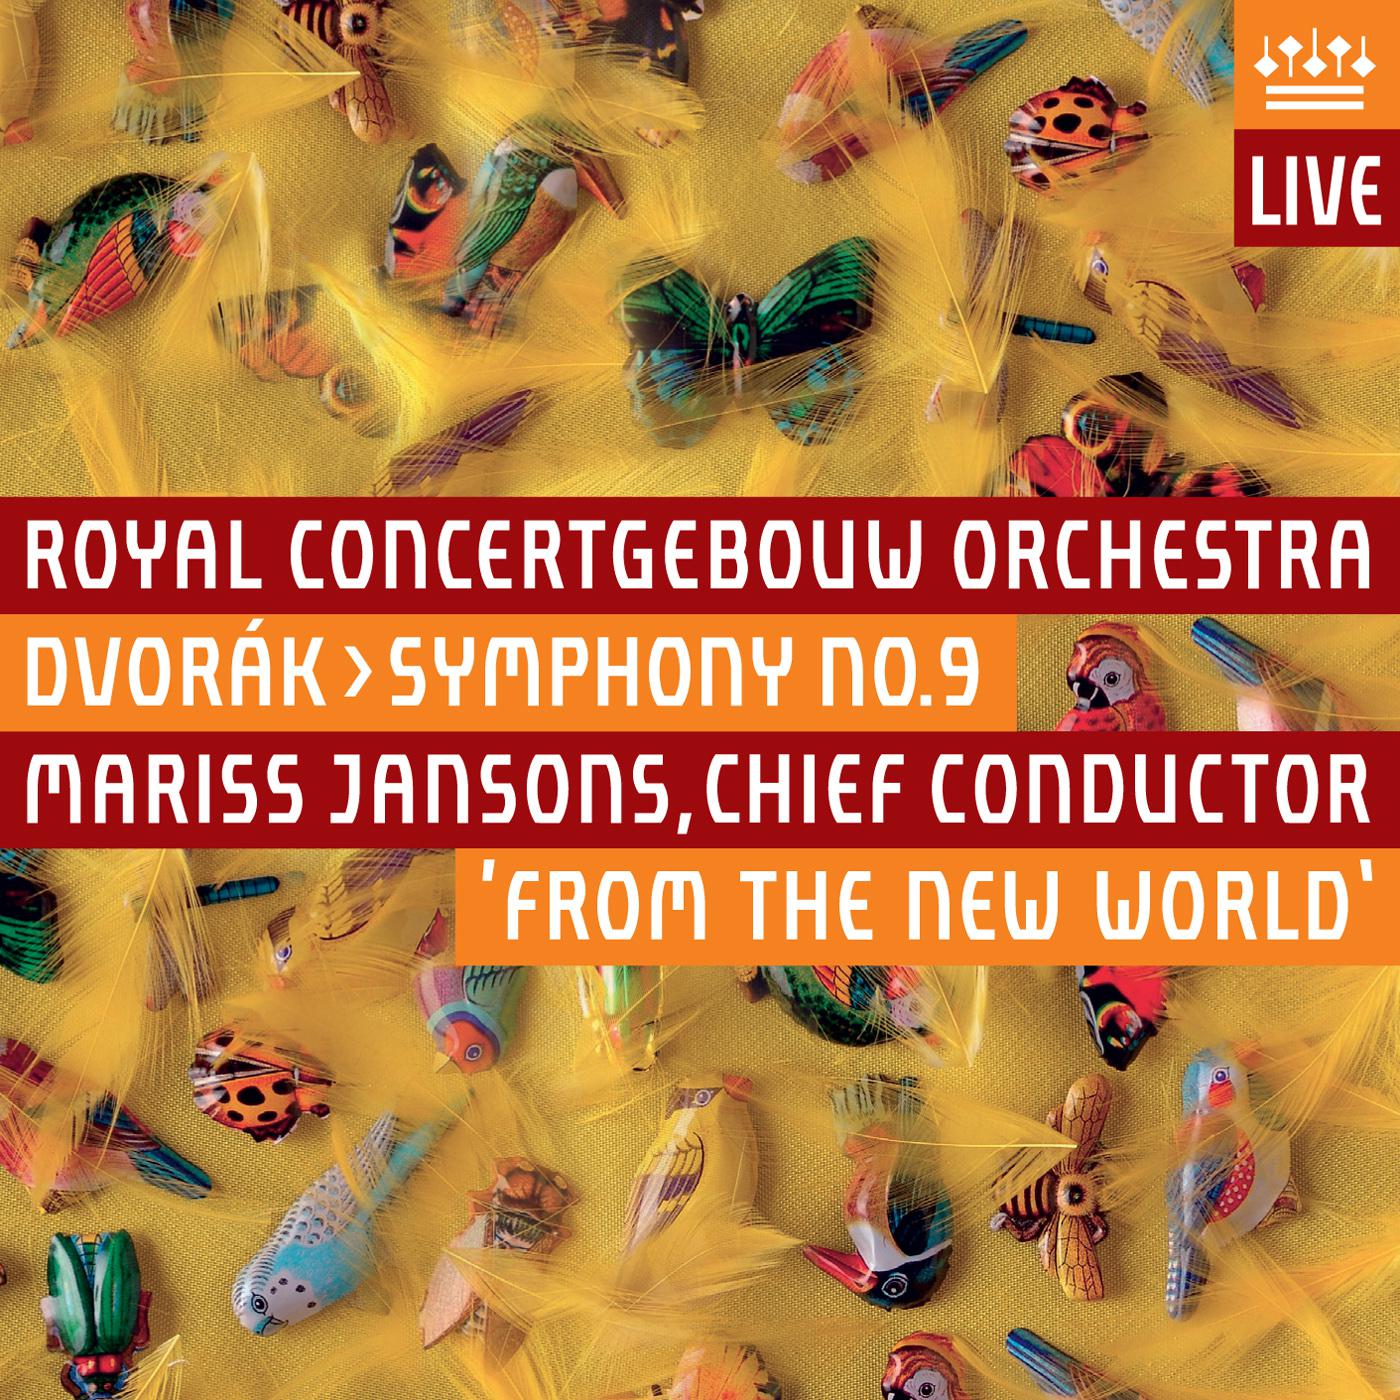 DVOÁ K, A.: Symphony No. 9, " From the New World" Royal Concertgebouw Orchestra, Jansons